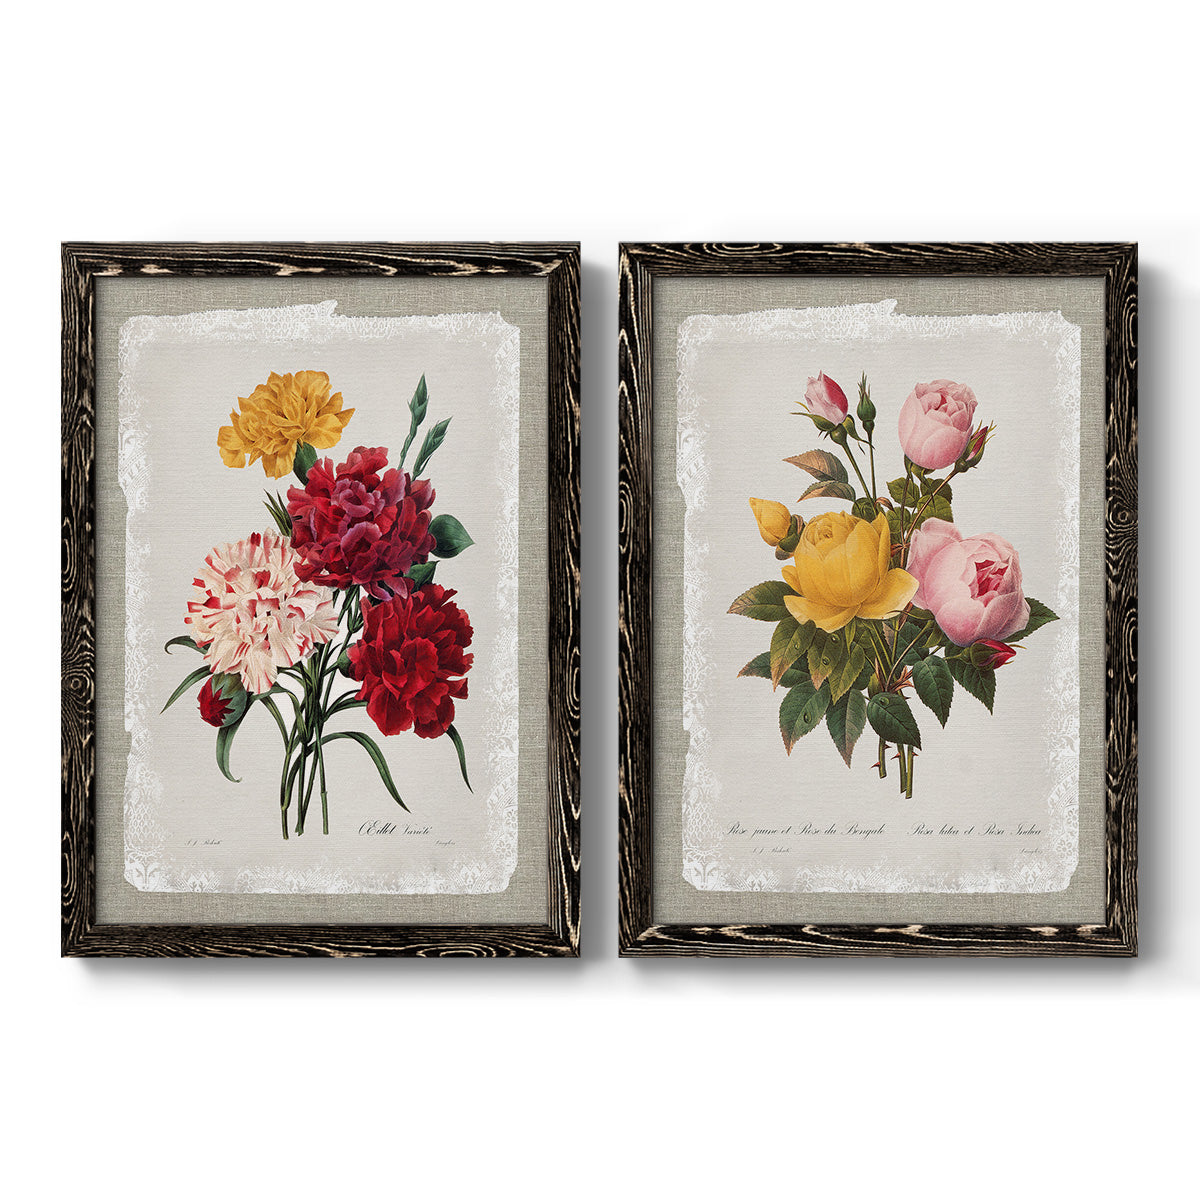 Botanical Bouquet Carnations - Premium Framed Canvas 2 Piece Set - Ready to Hang